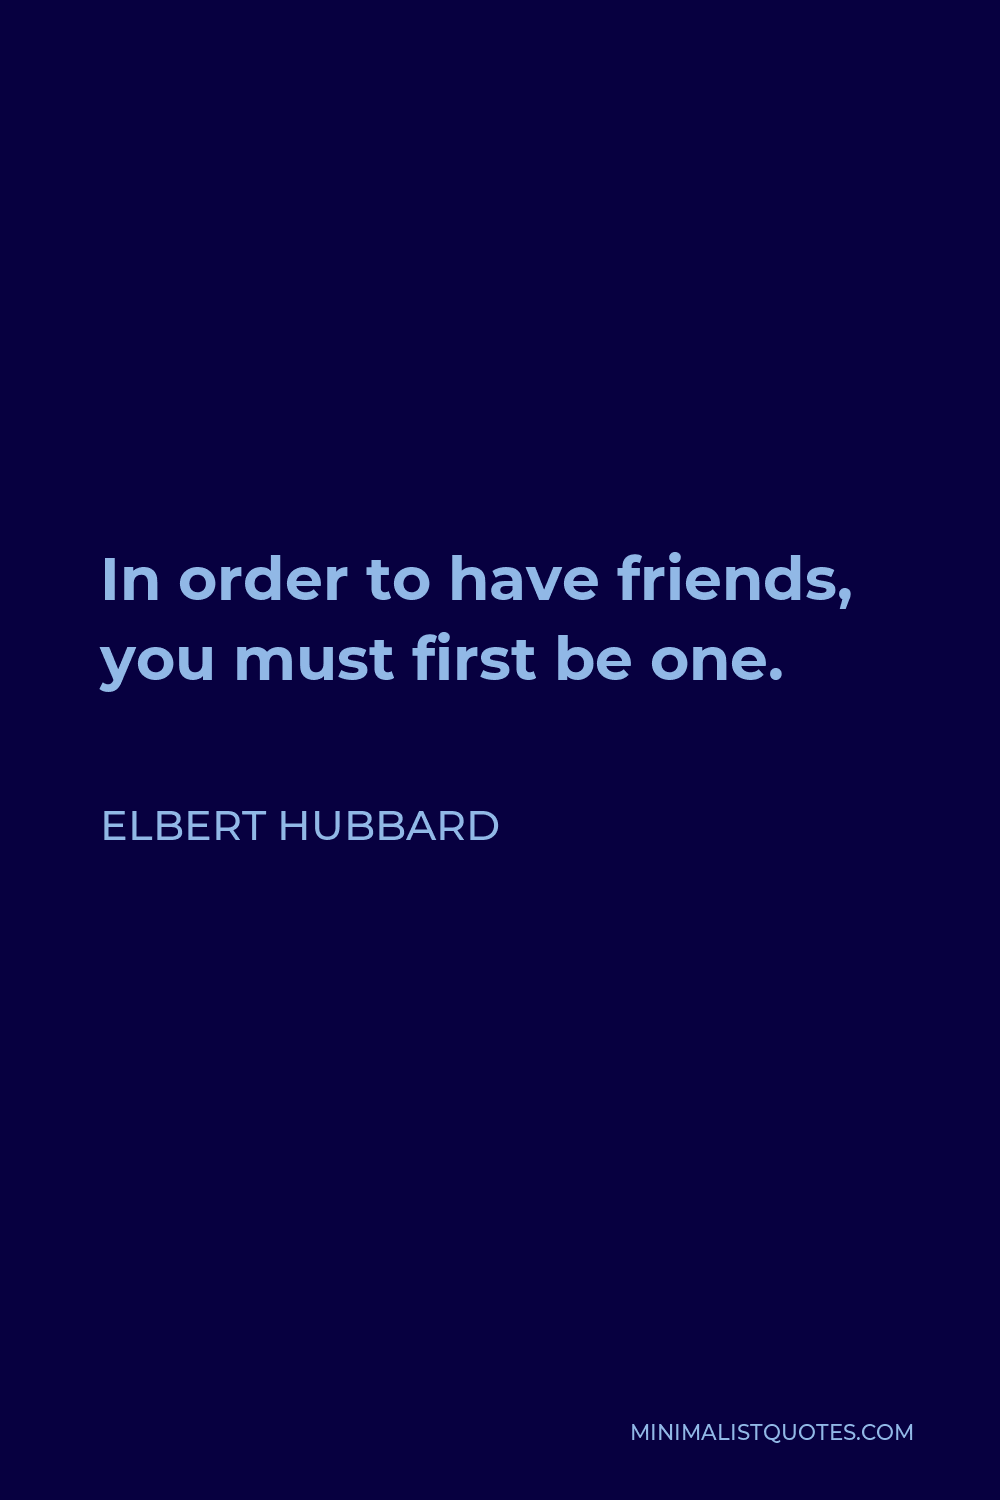 Elbert Hubbard Quote - In order to have friends, you must first be one.